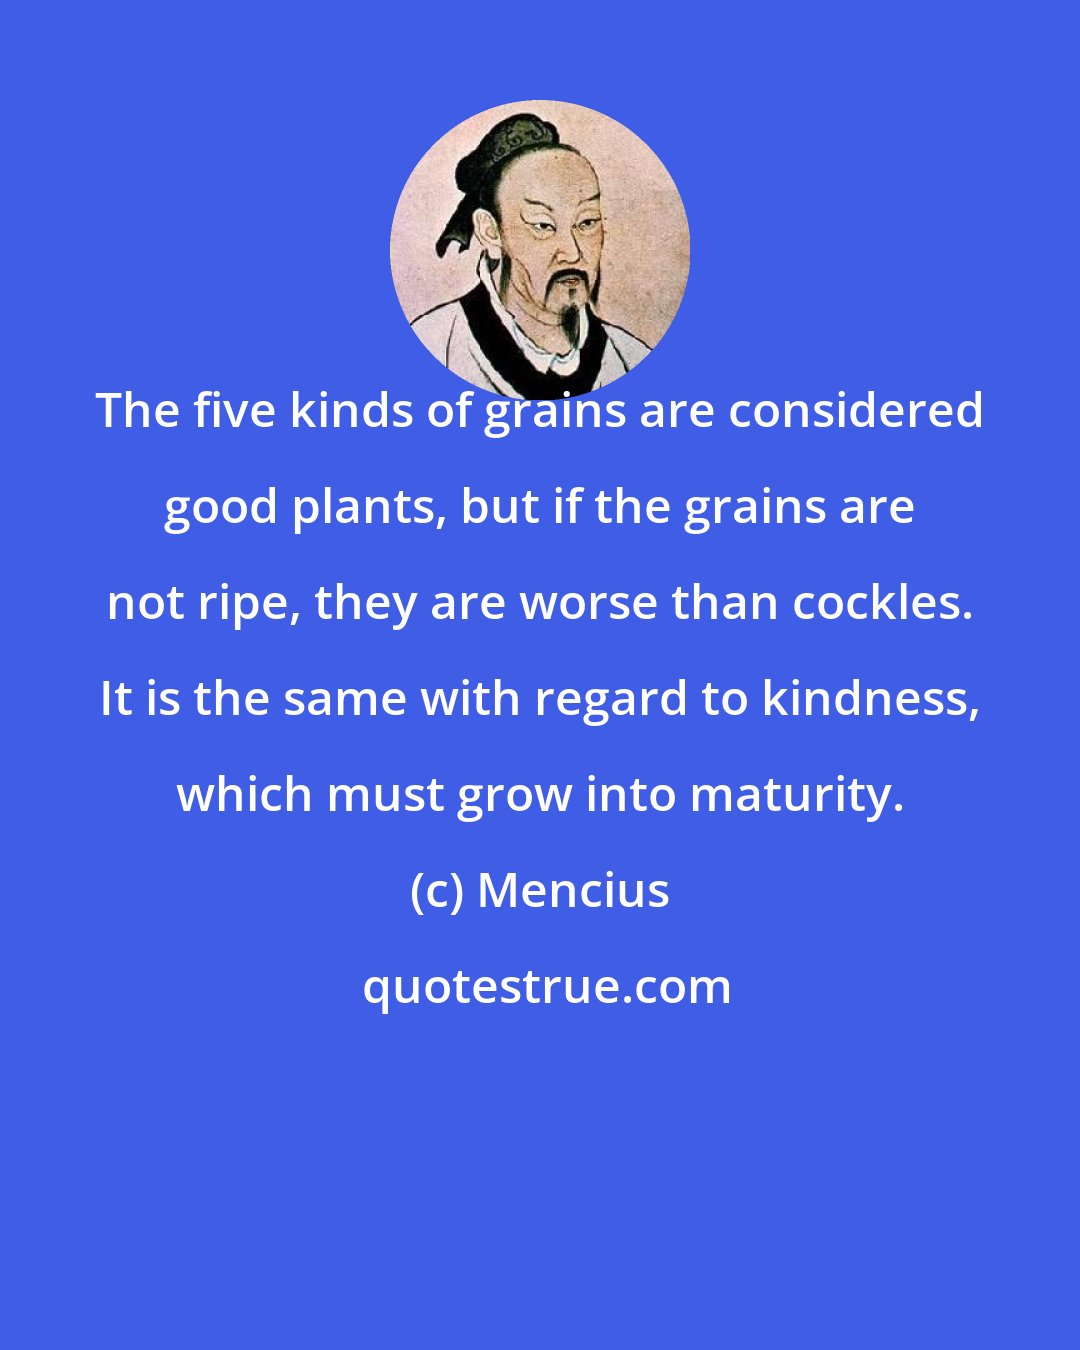 Mencius: The five kinds of grains are considered good plants, but if the grains are not ripe, they are worse than cockles. It is the same with regard to kindness, which must grow into maturity.